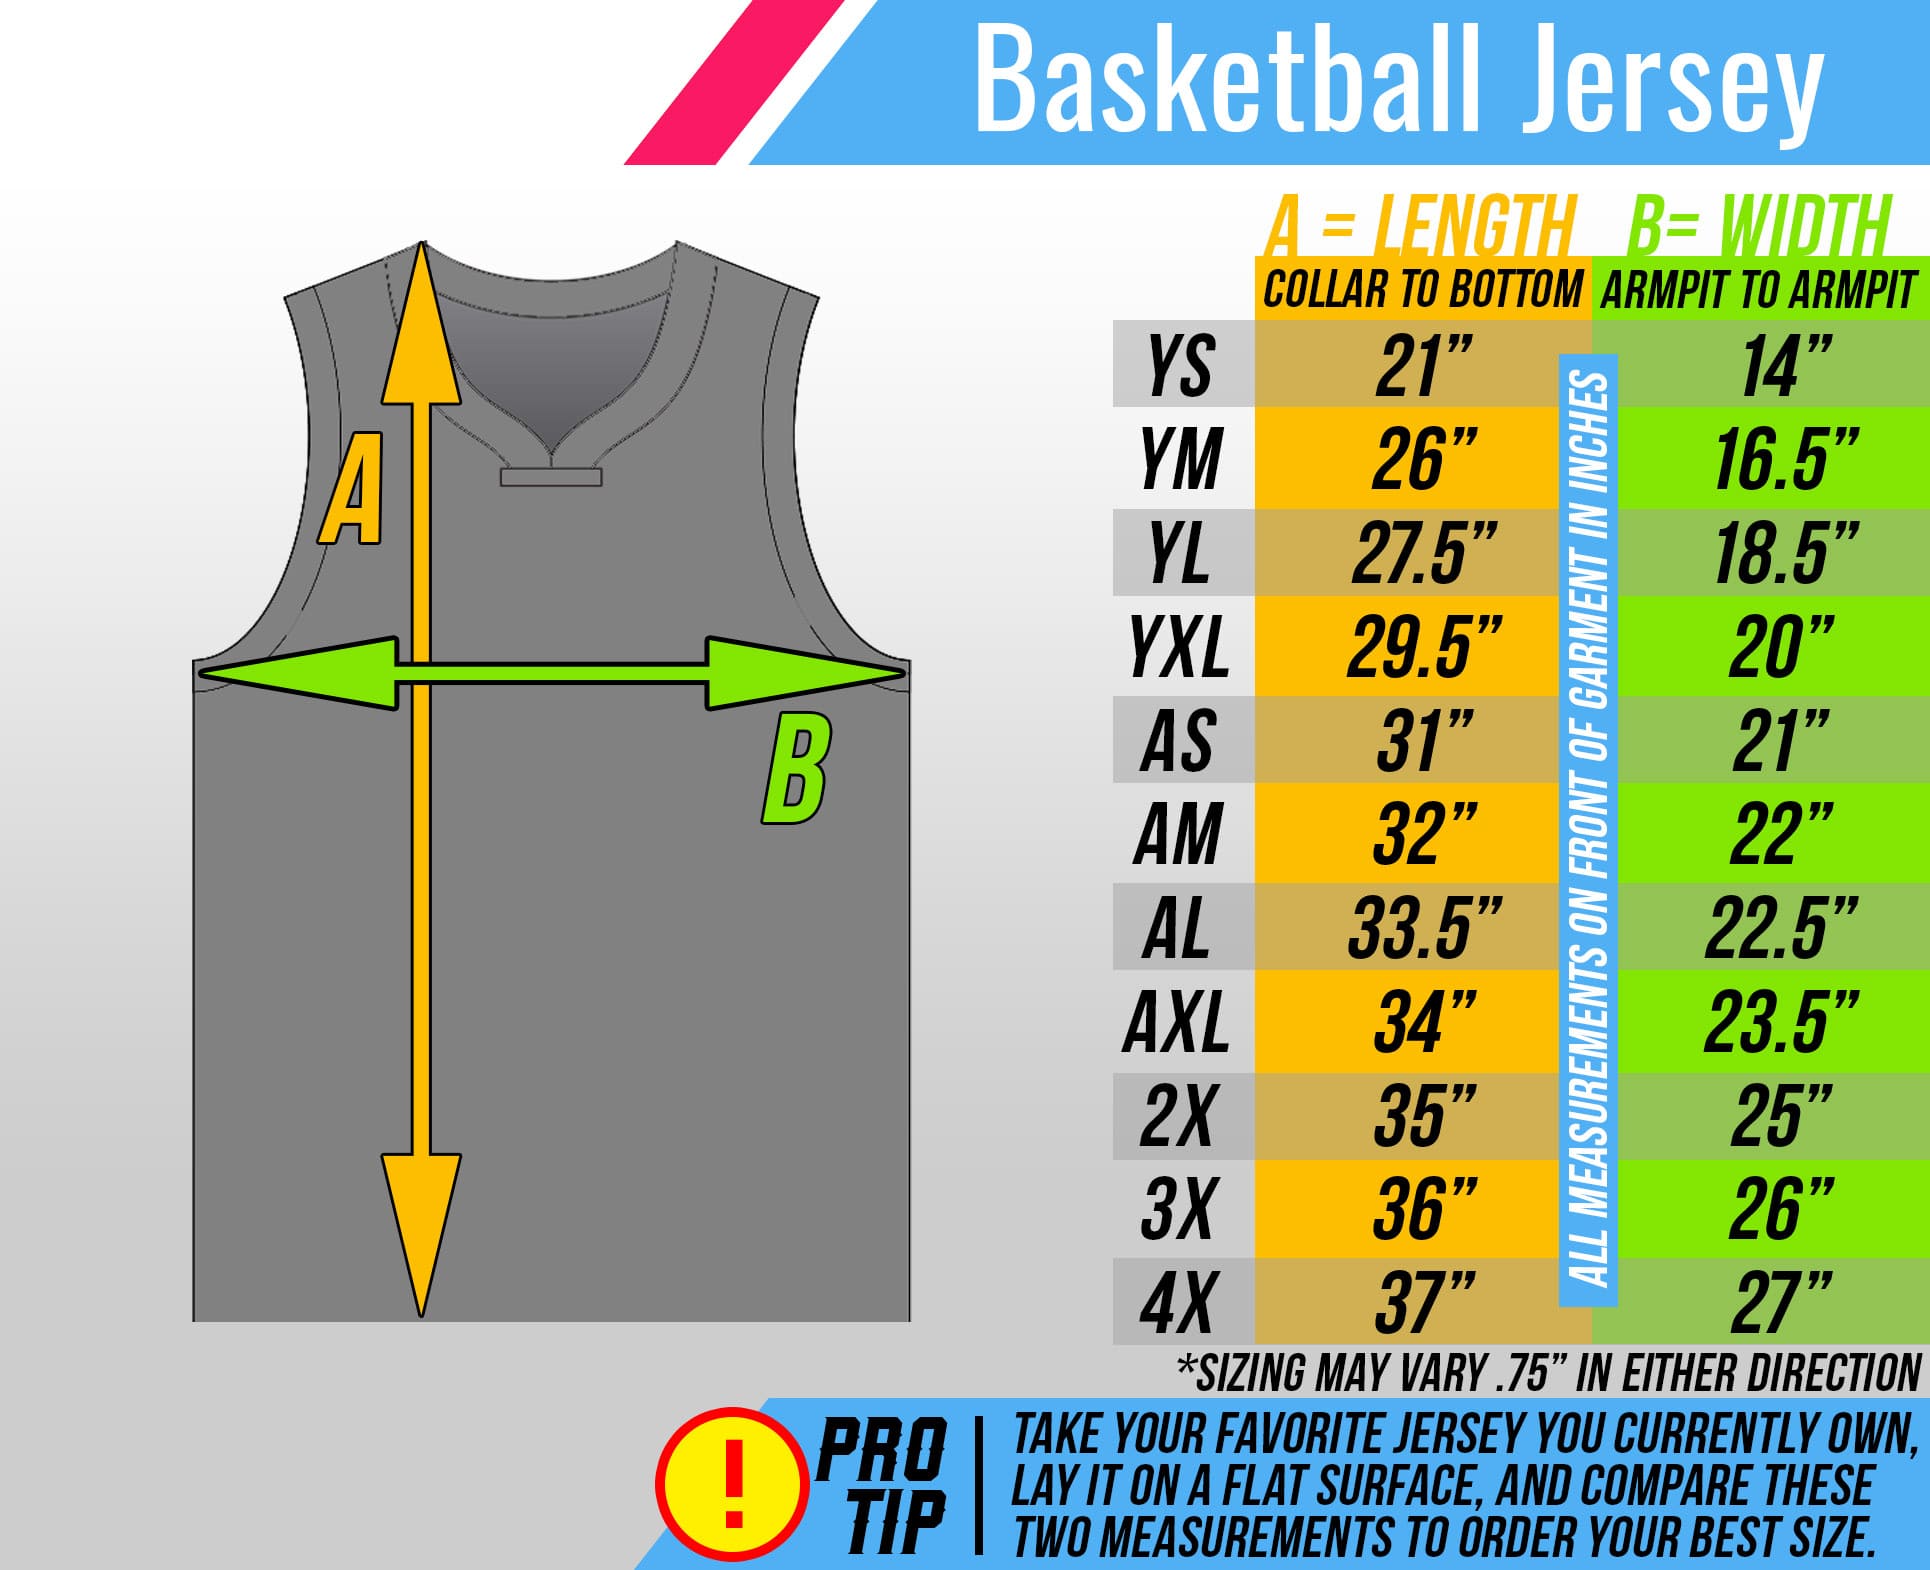 Sublimated Basketball Jersey Knights style